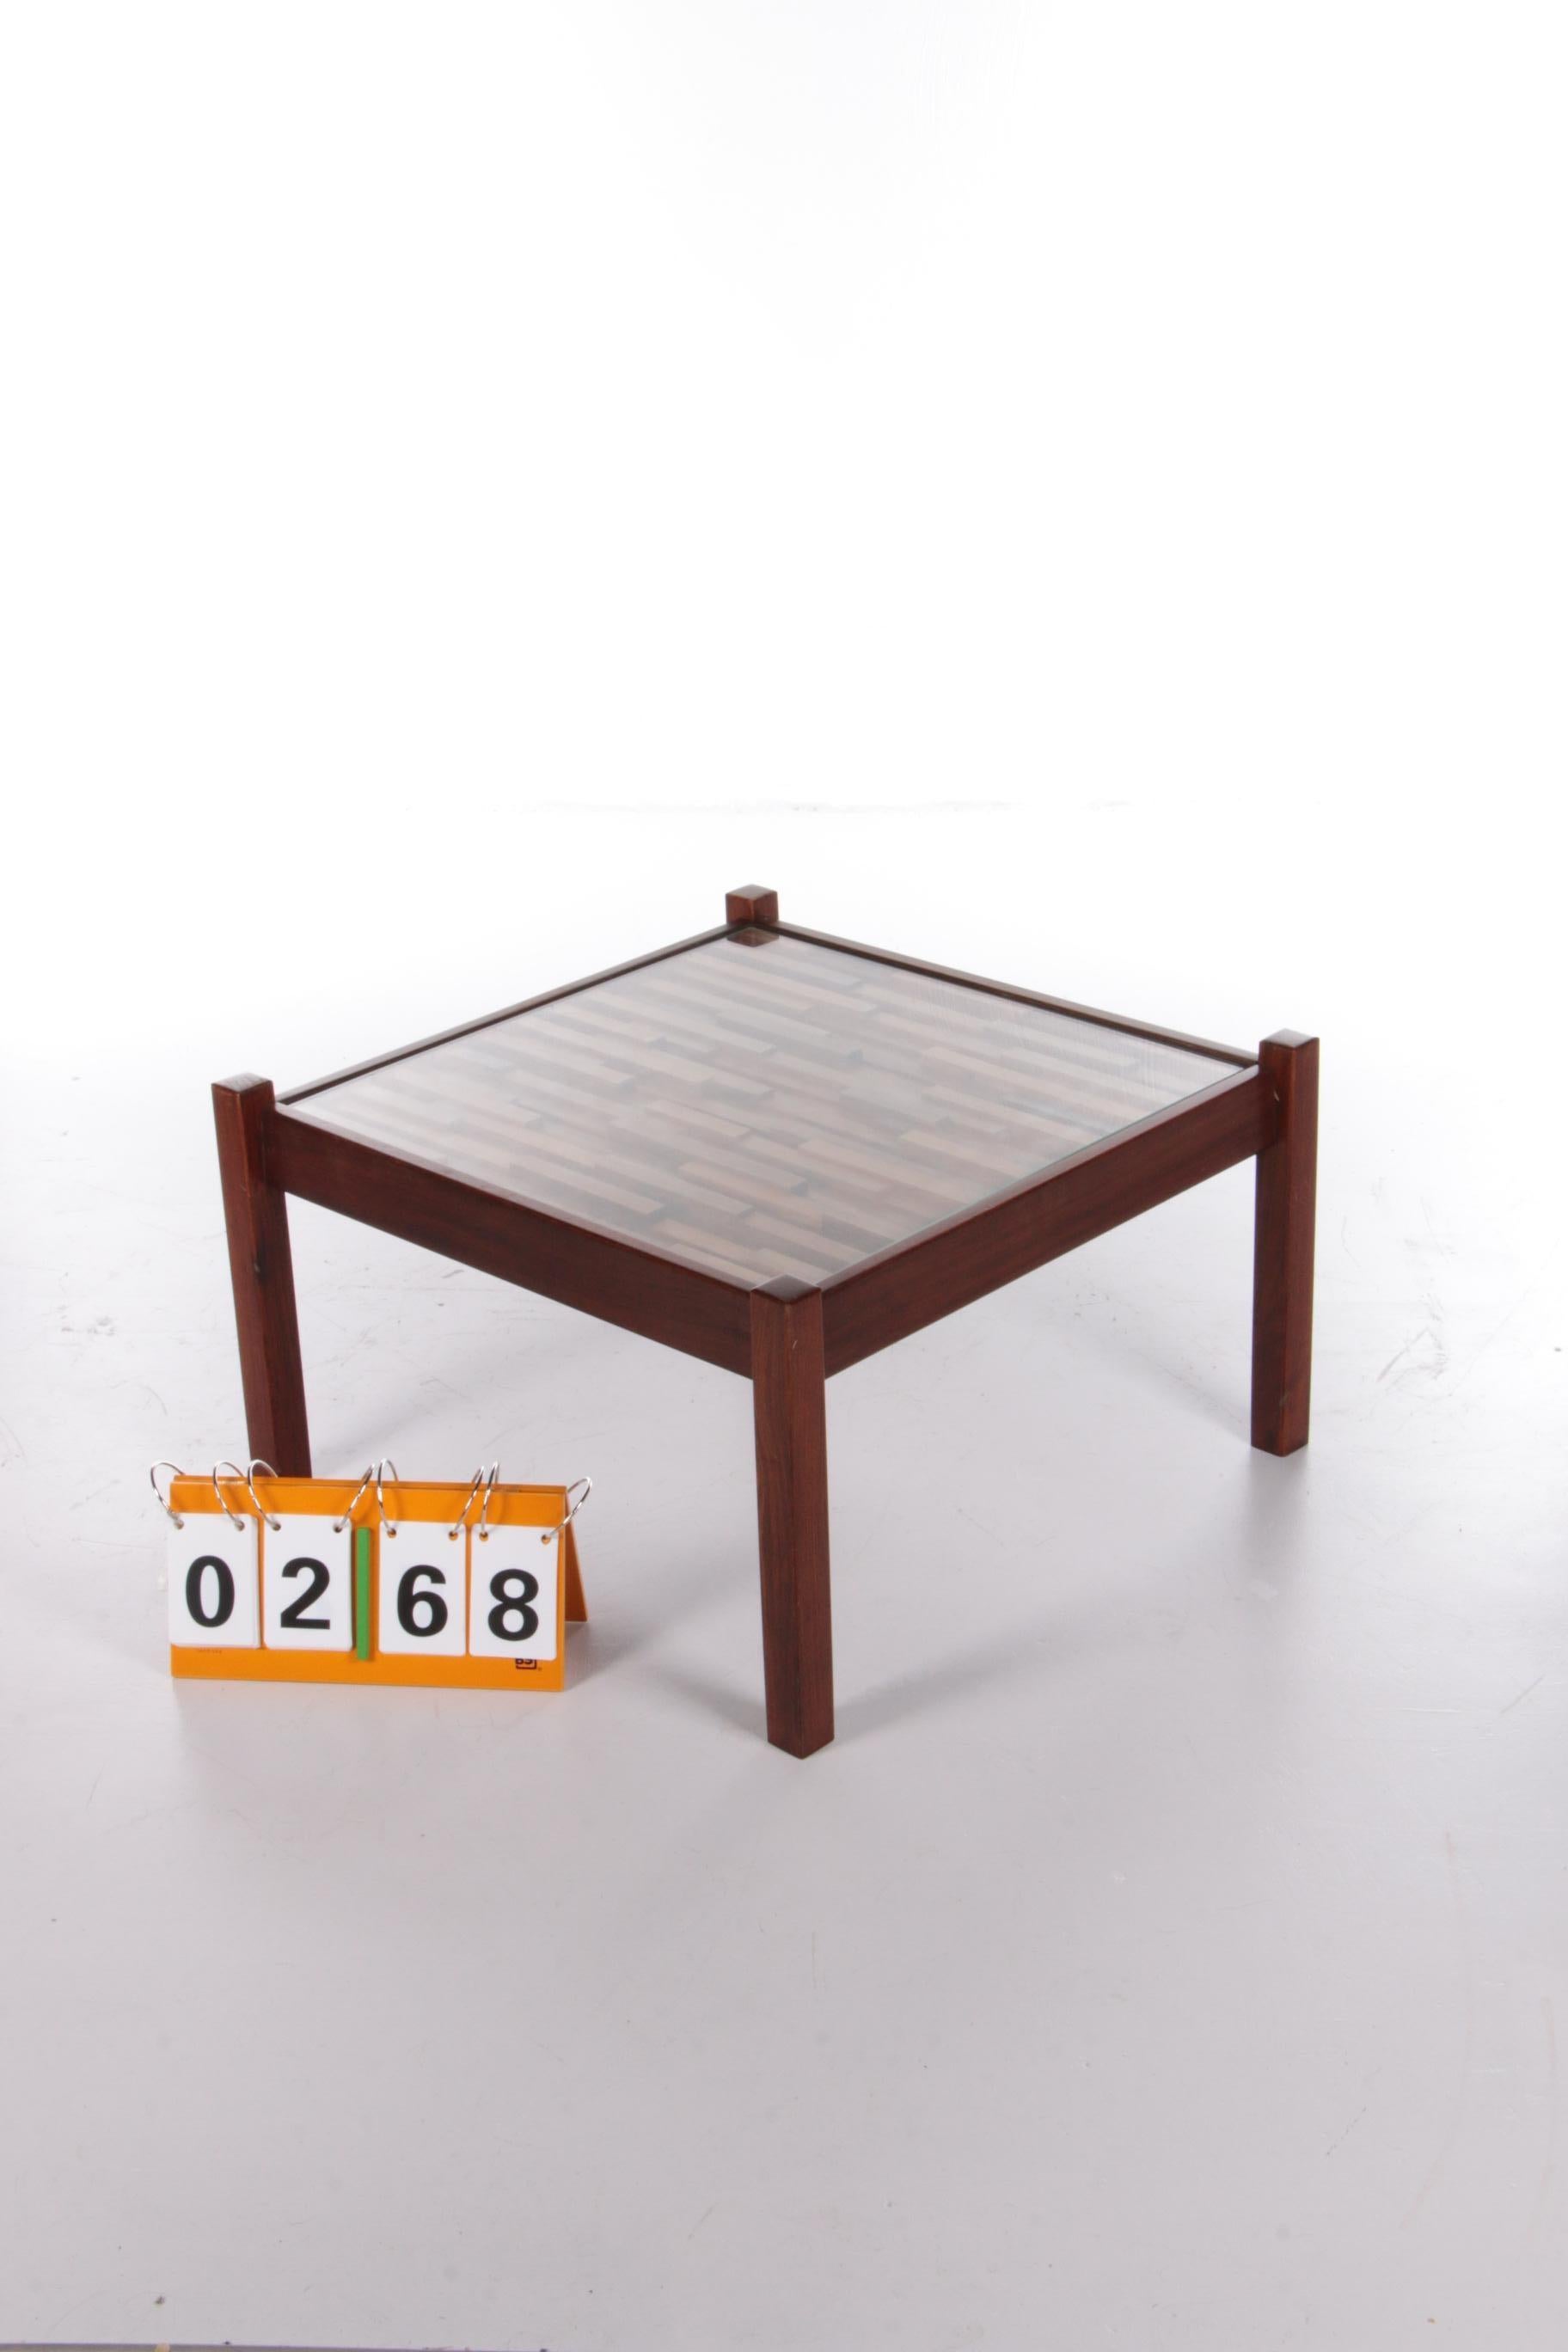 Mid-Century Modern Brazilian Coffee Table Design by Percival Lafer, 1960s For Sale